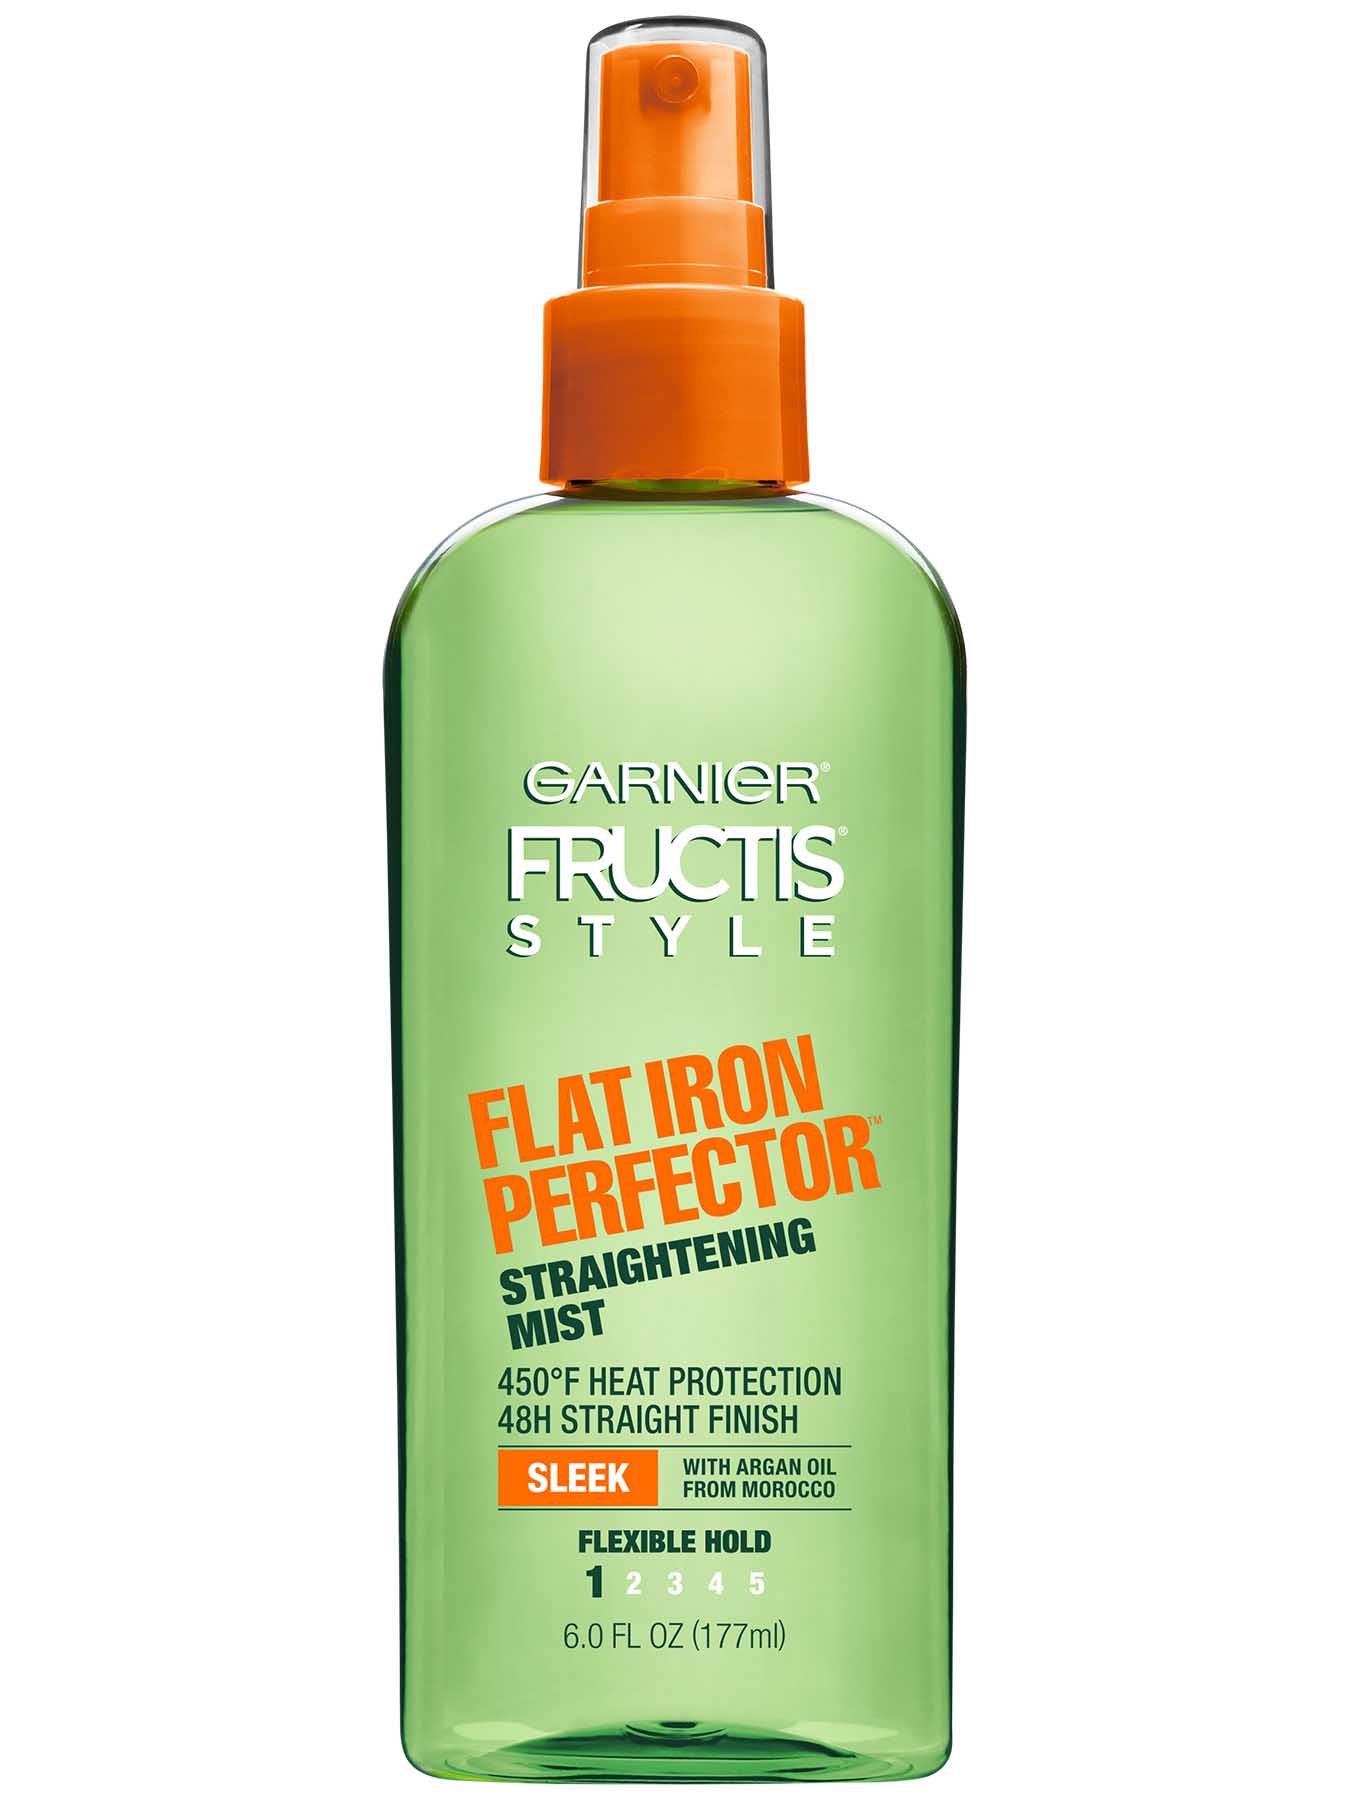 Front view of Flat Iron Perfector Straightening Mist.